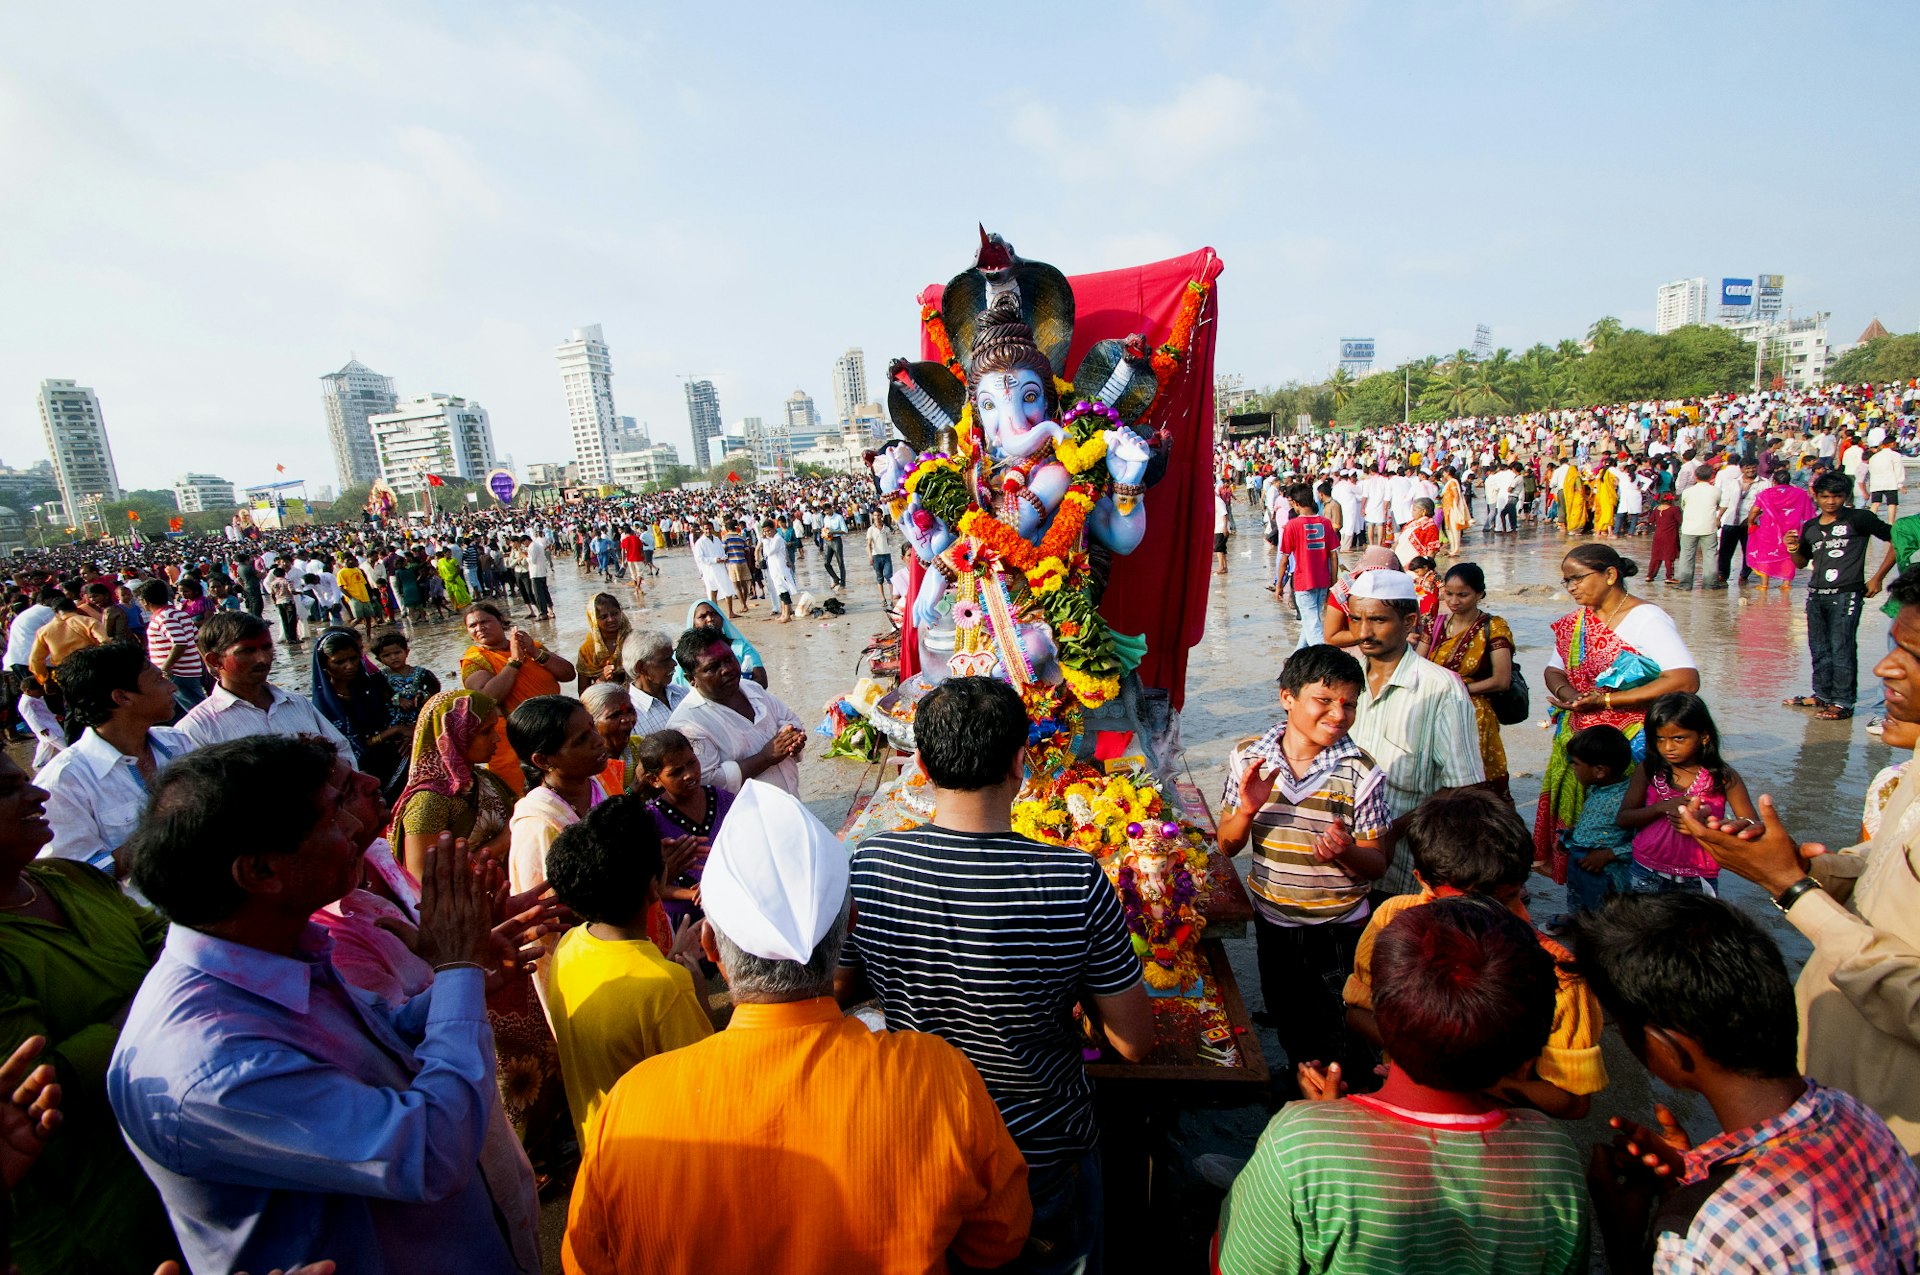 Devotees carry a rainbow-coloured statue of Ganesha down to the ocean © CRS PHOTO / Shutterstock Royalty Free